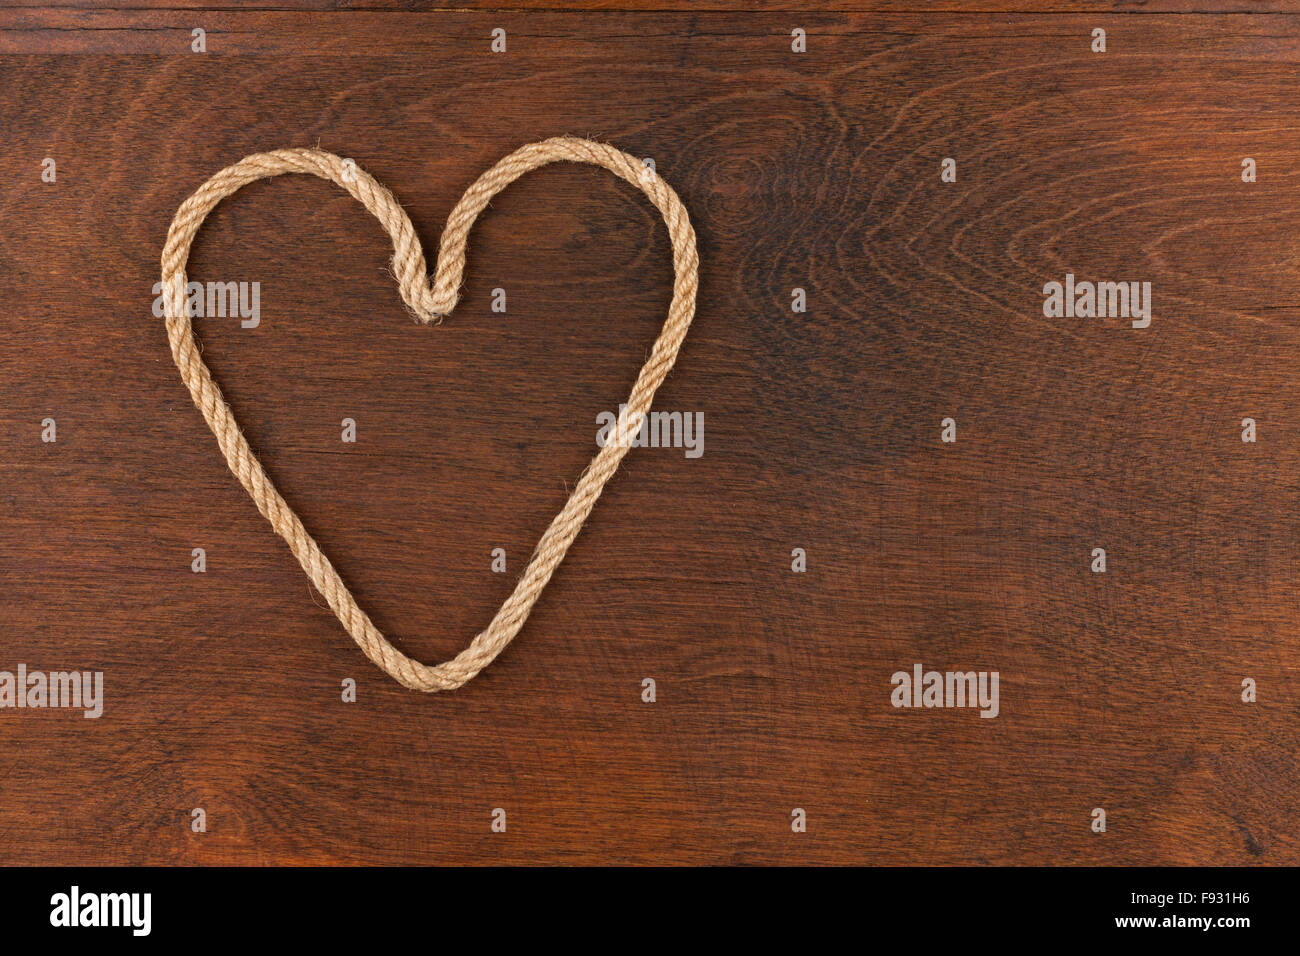 Symbolic heart made of rope lying on a wooden surface , as background Stock Photo